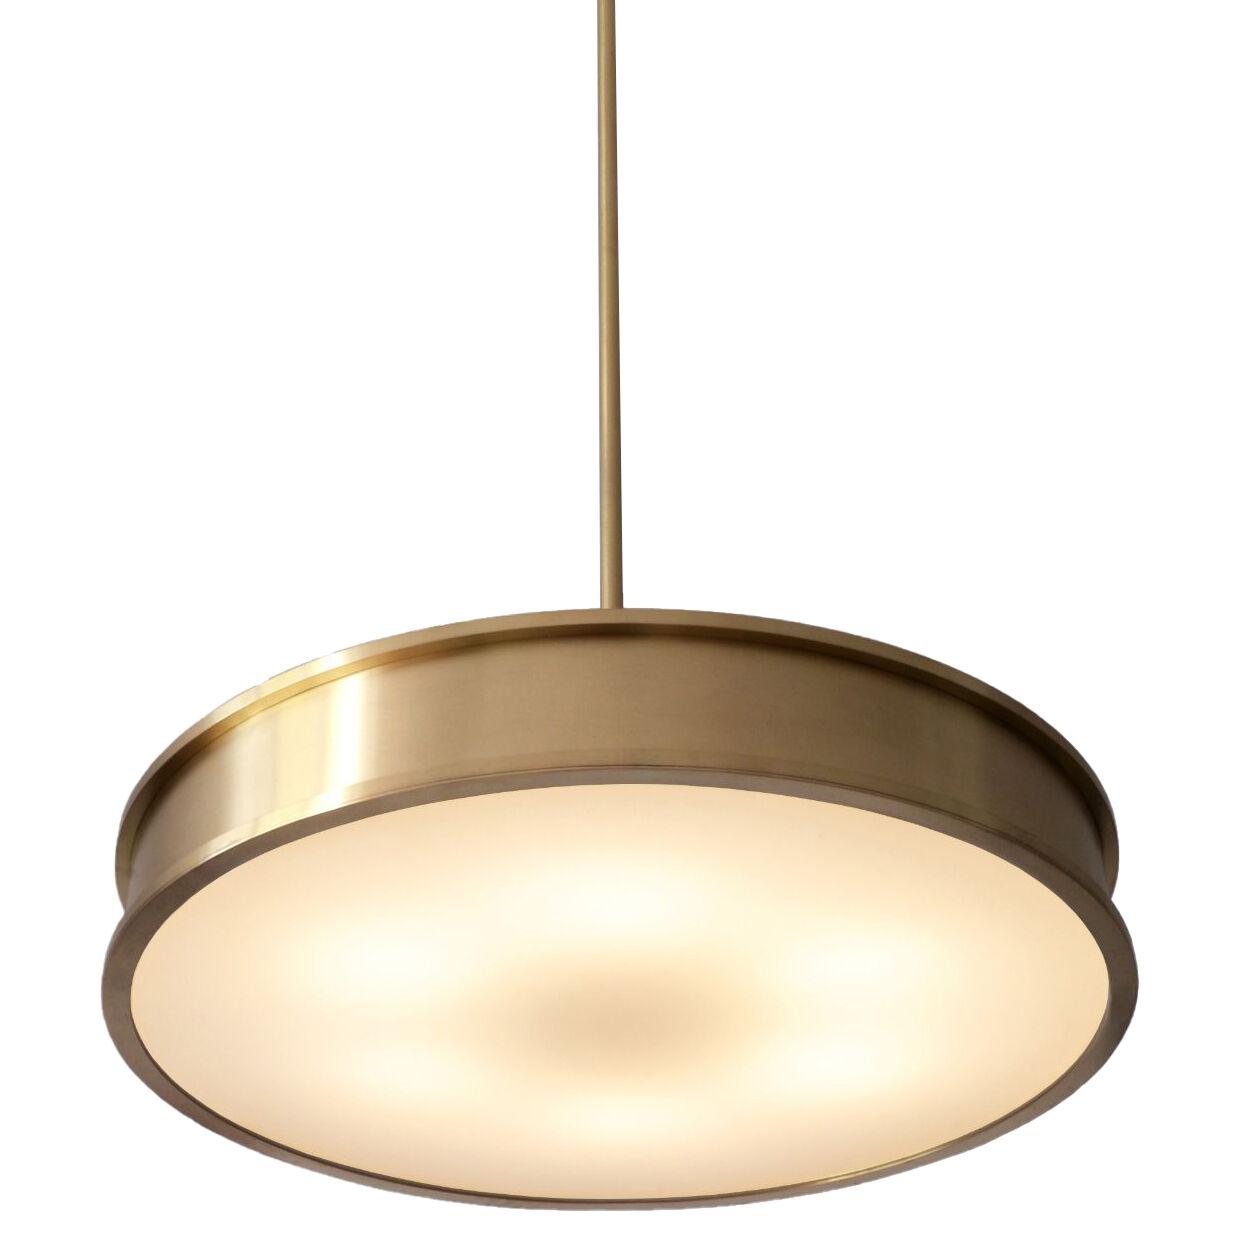 Customized modernist circular pendant light in brushed brass and opal glass